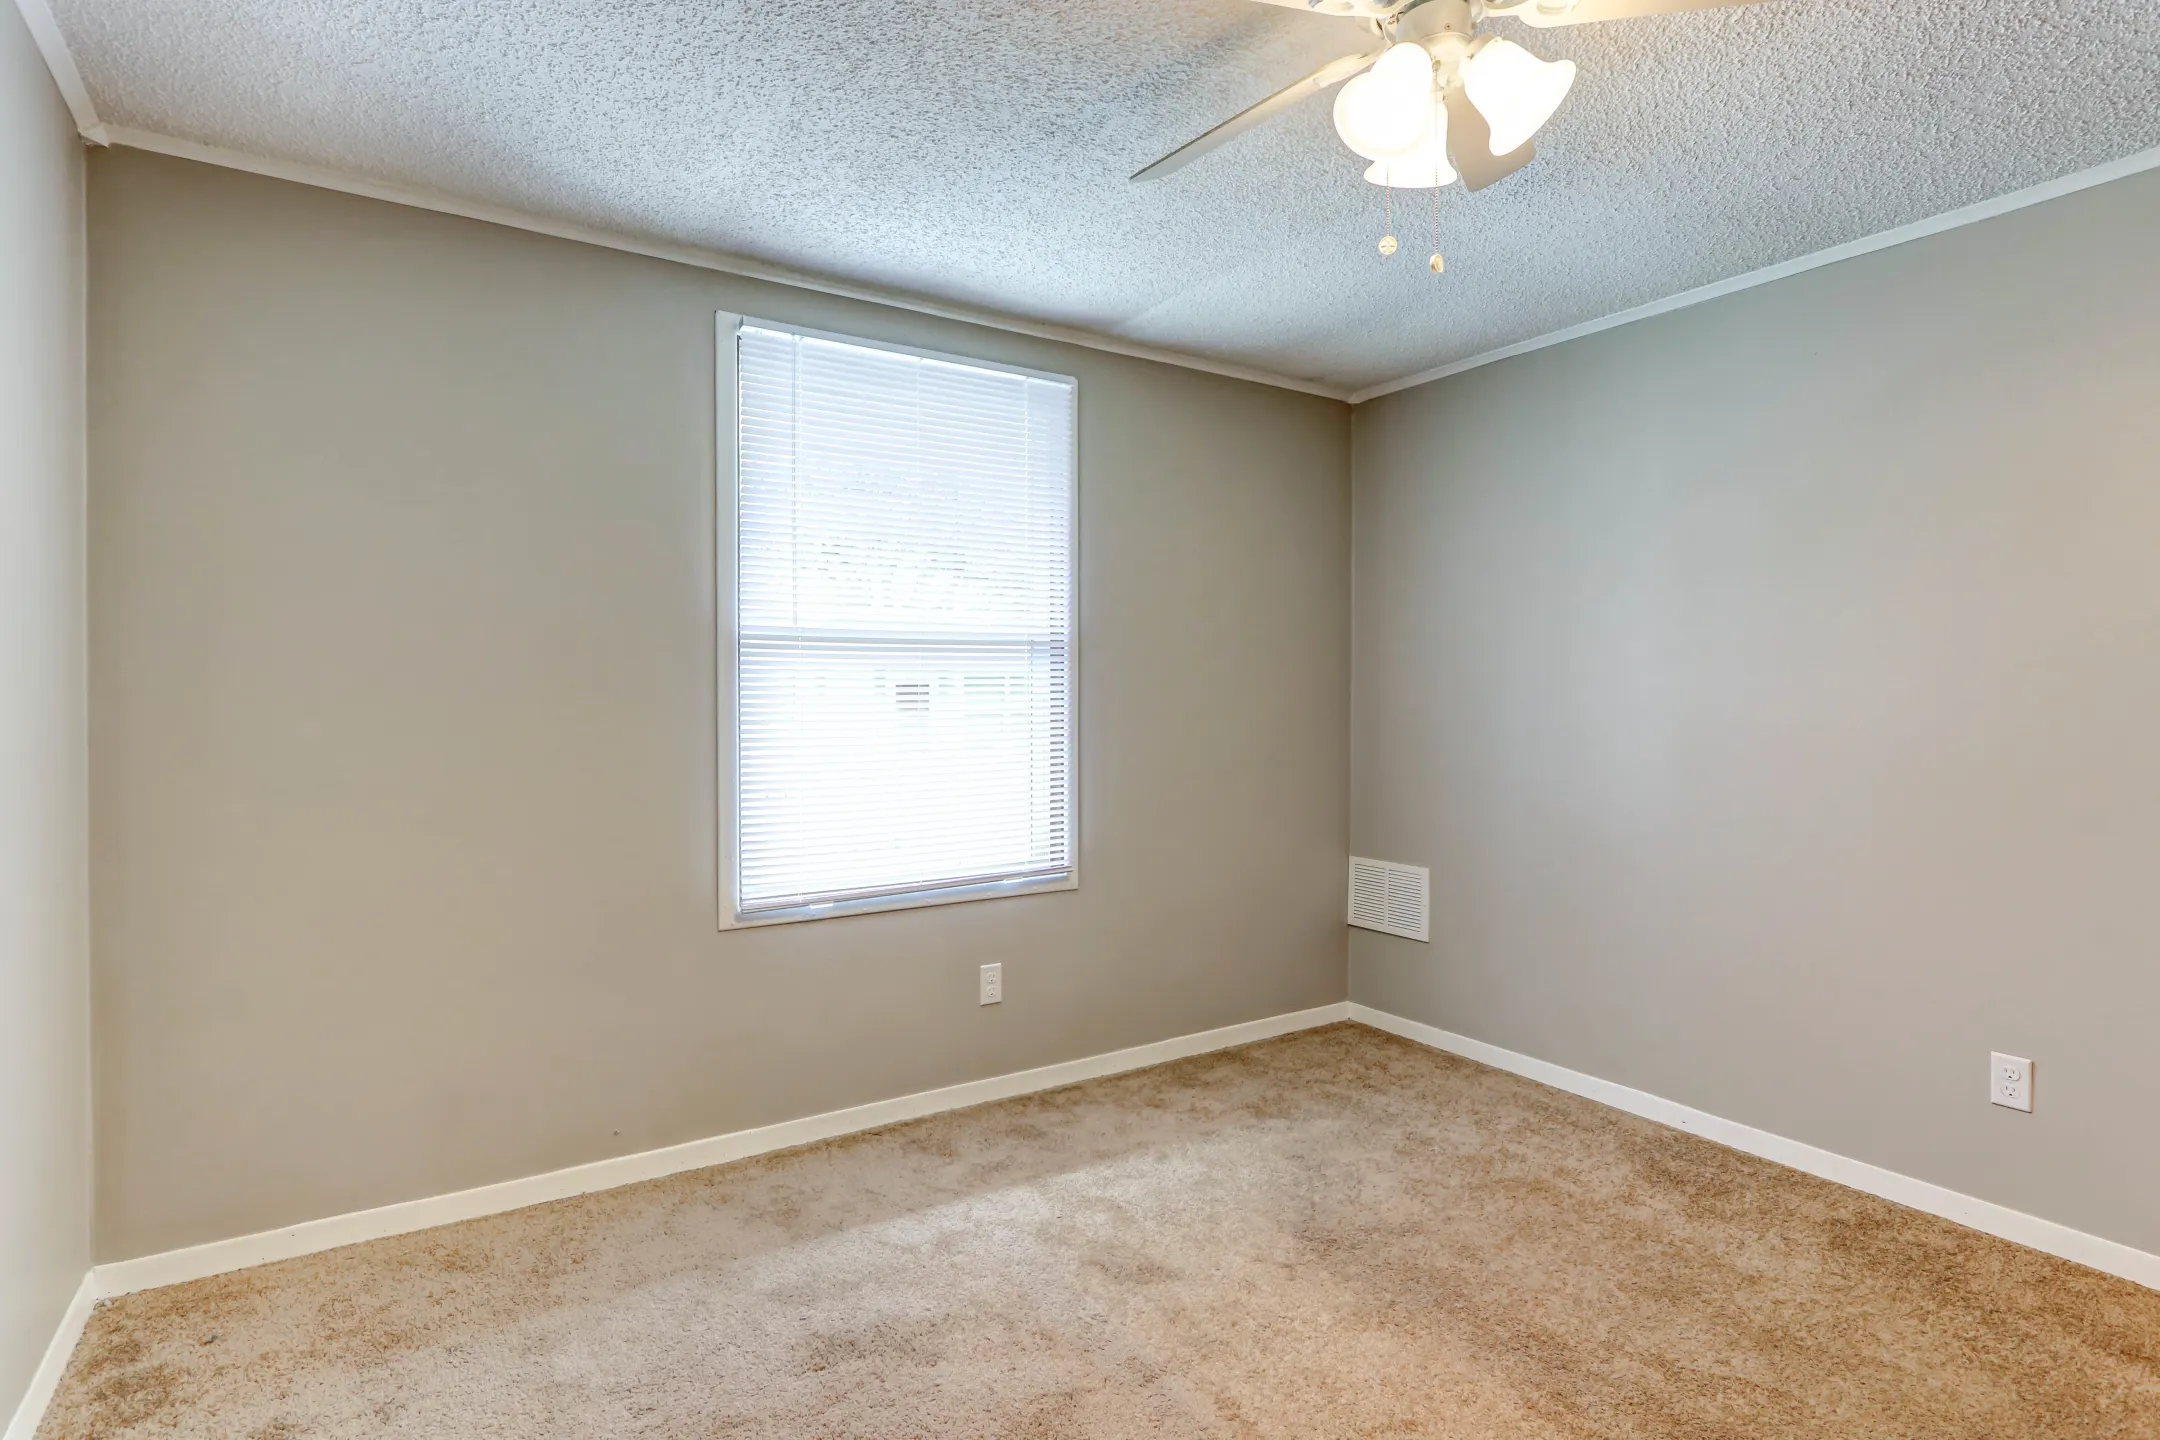 Bedroom - Carriage Hill Apartments - Medina, OH